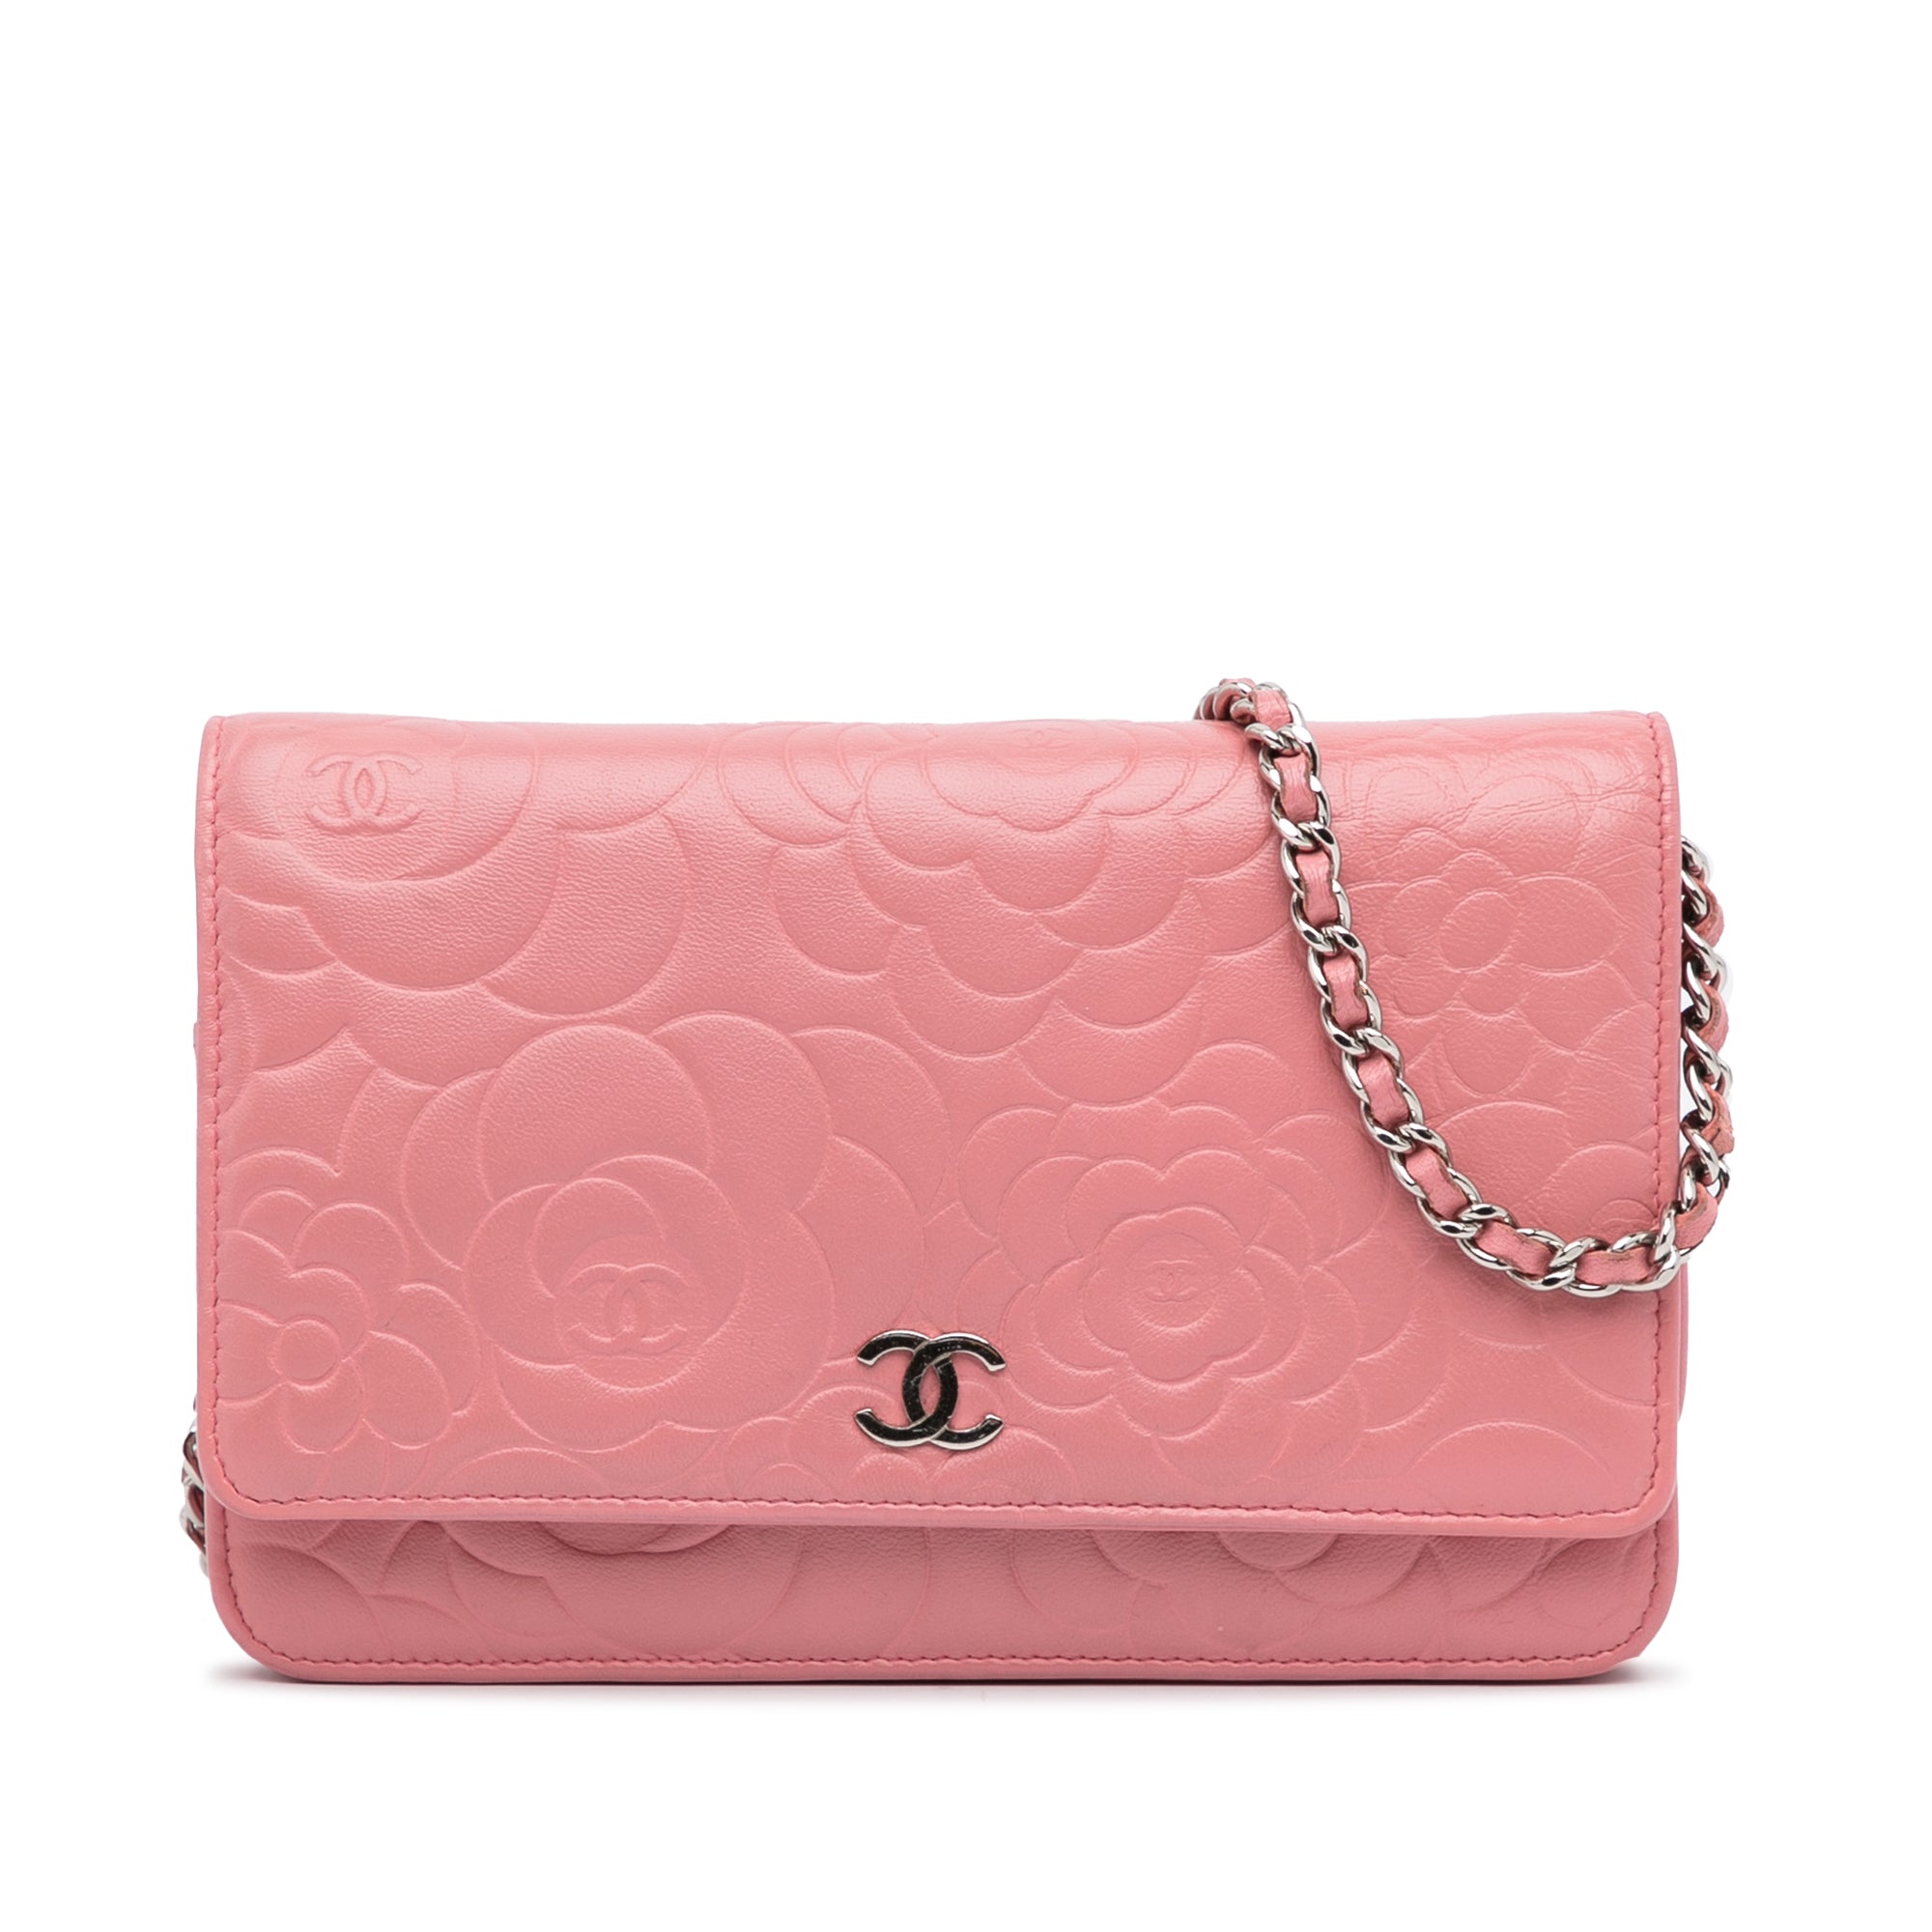 Chanel Camellia Round Leather Crossbody Bag Light Pink-DDH